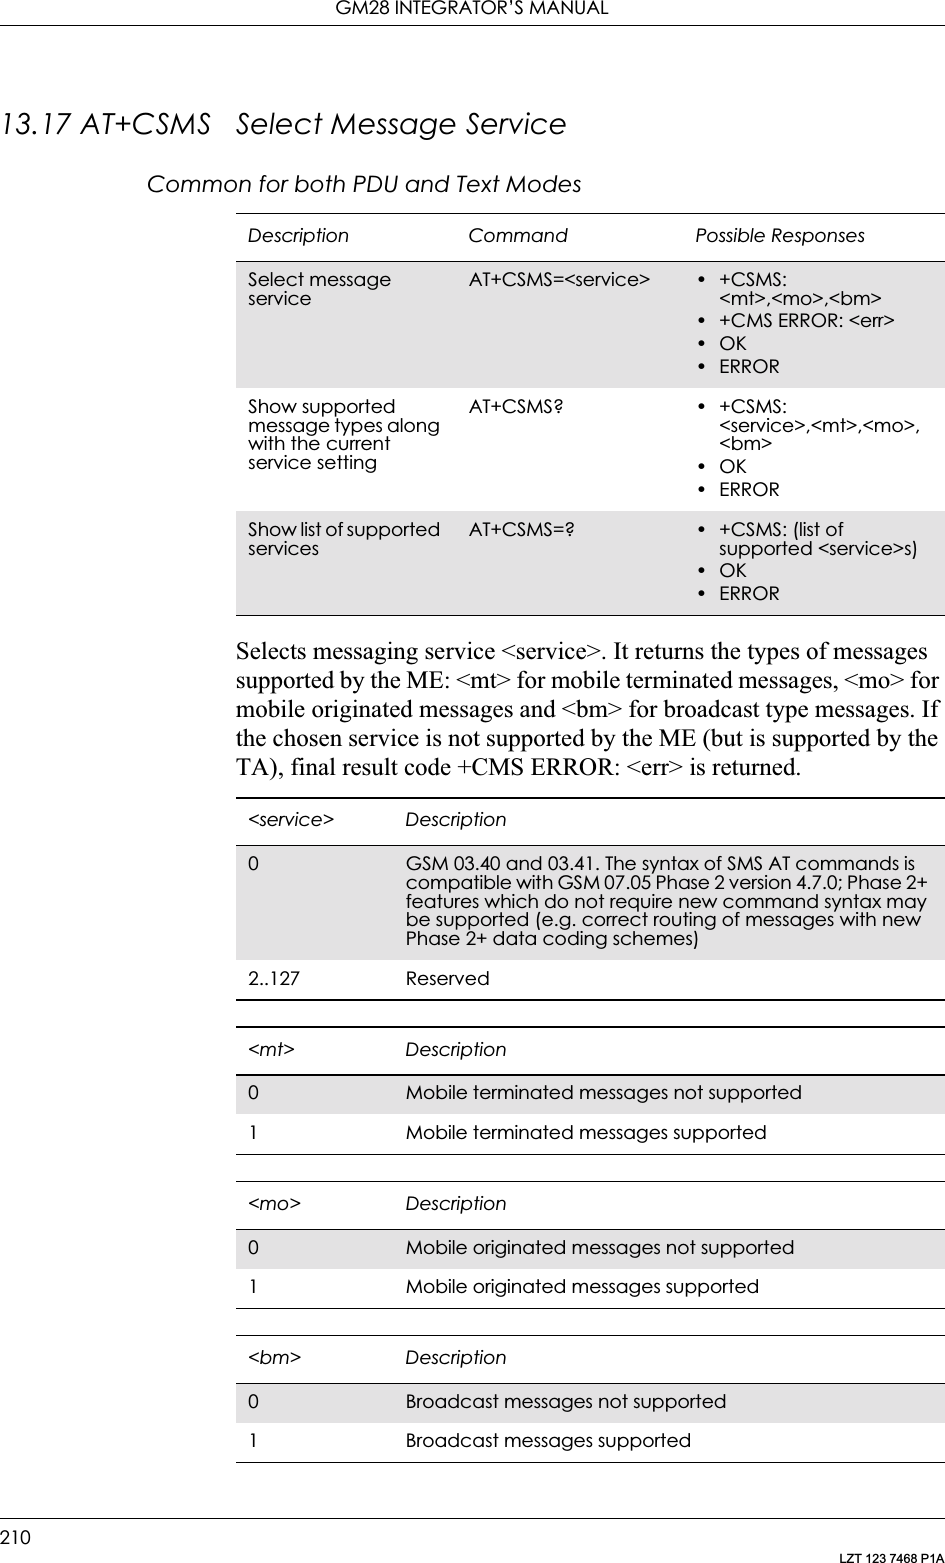 GM28 INTEGRATOR’S MANUAL210LZT 123 7468 P1A13.17 AT+CSMS Select Message ServiceCommon for both PDU and Text ModesSelects messaging service &lt;service&gt;. It returns the types of messages supported by the ME: &lt;mt&gt; for mobile terminated messages, &lt;mo&gt; for mobile originated messages and &lt;bm&gt; for broadcast type messages. If the chosen service is not supported by the ME (but is supported by the TA), final result code +CMS ERROR: &lt;err&gt; is returned.Description Command Possible ResponsesSelect message serviceAT+CSMS=&lt;service&gt; •+CSMS: &lt;mt&gt;,&lt;mo&gt;,&lt;bm&gt;• +CMS ERROR: &lt;err&gt;•OK•ERRORShow supported message types along with the current service settingAT+CSMS? • +CSMS: &lt;service&gt;,&lt;mt&gt;,&lt;mo&gt;,&lt;bm&gt;•OK•ERRORShow list of supported servicesAT+CSMS=? • +CSMS: (list of supported &lt;service&gt;s)•OK•ERROR&lt;service&gt; Description0GSM 03.40 and 03.41. The syntax of SMS AT commands is compatible with GSM 07.05 Phase 2 version 4.7.0; Phase 2+ features which do not require new command syntax may be supported (e.g. correct routing of messages with new Phase 2+ data coding schemes)2..127 Reserved&lt;mt&gt; Description0Mobile terminated messages not supported1 Mobile terminated messages supported&lt;mo&gt; Description0Mobile originated messages not supported1 Mobile originated messages supported&lt;bm&gt; Description0Broadcast messages not supported1 Broadcast messages supported